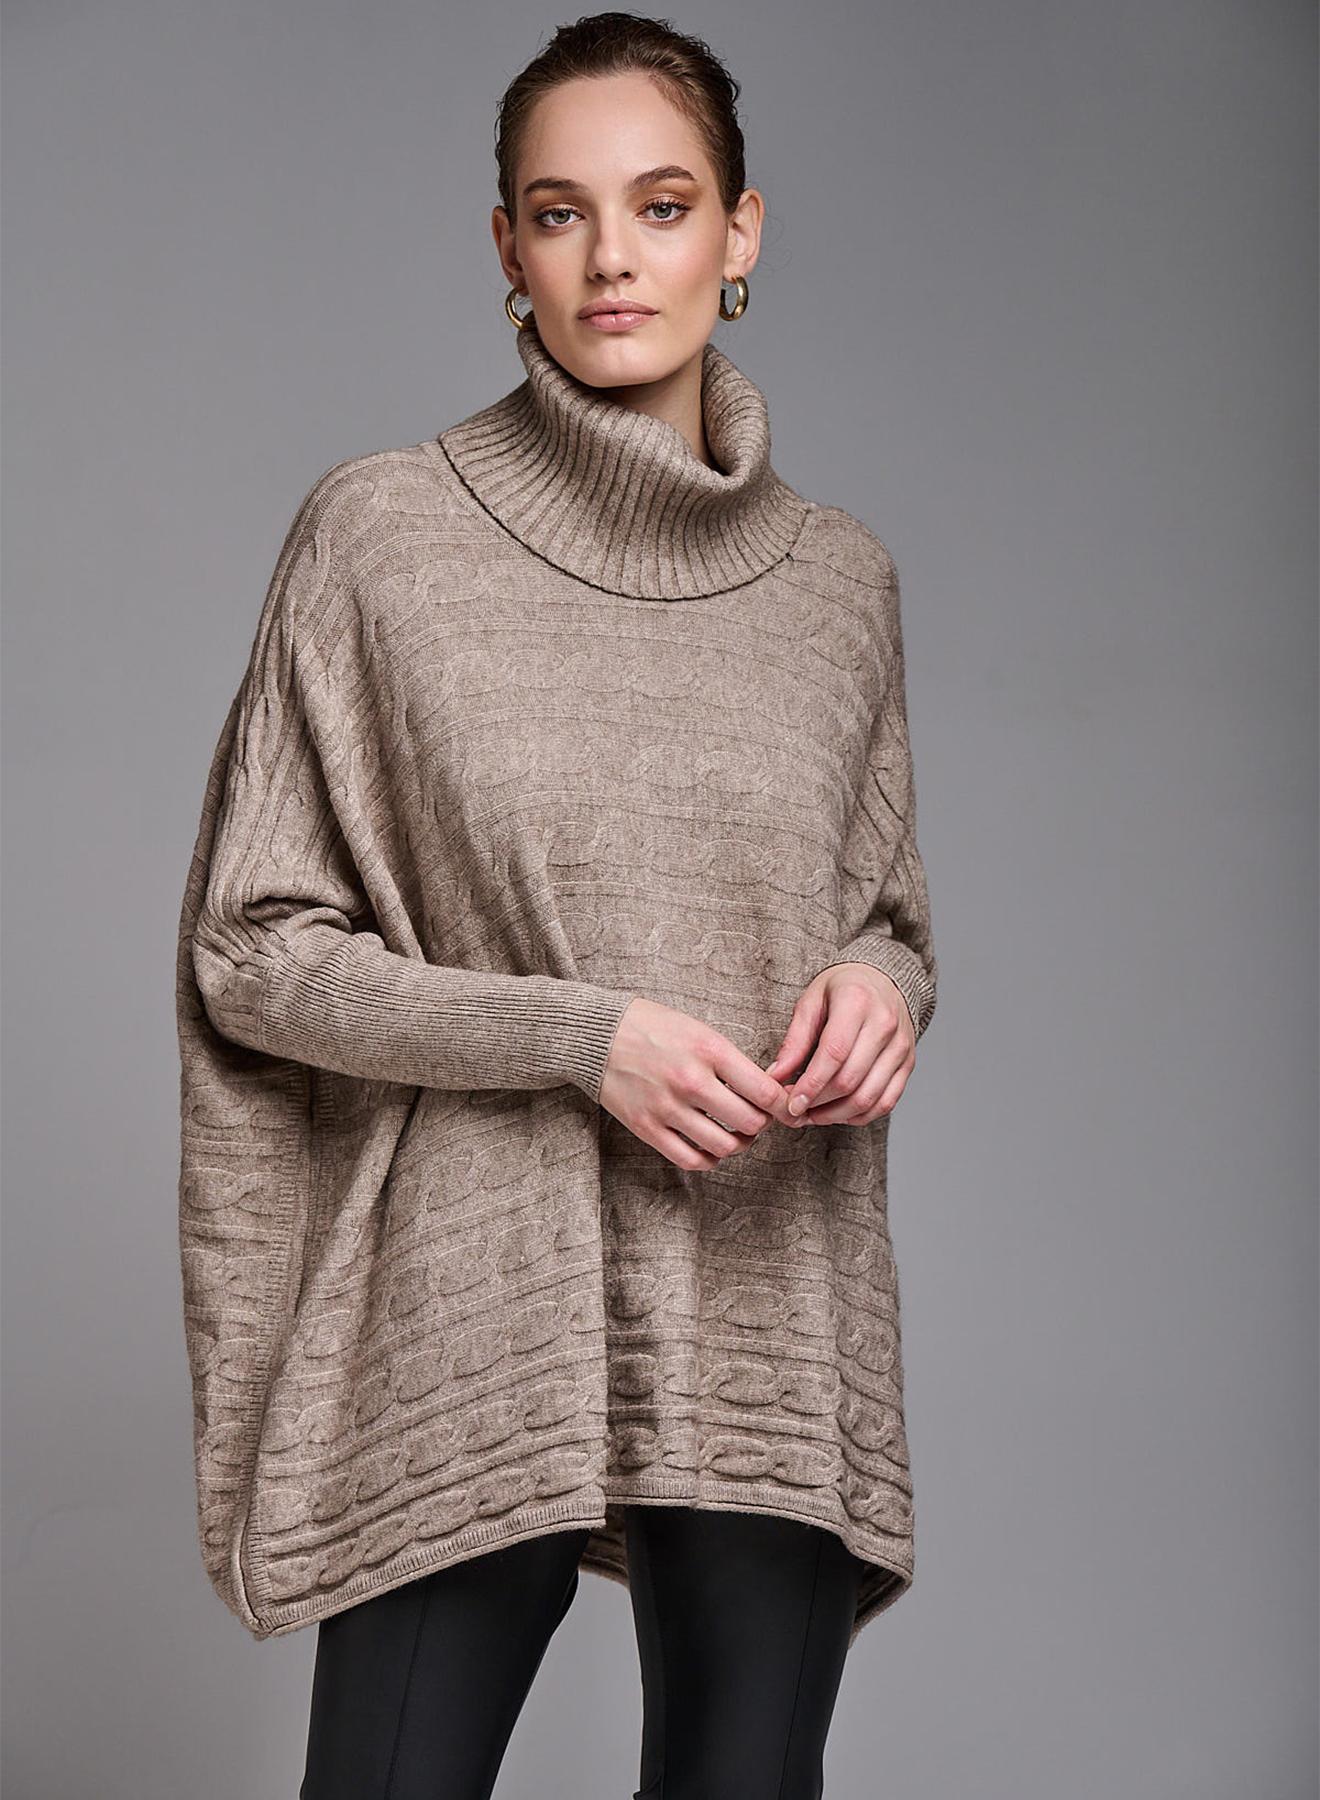 Oversized turtleneck sweater with textured details - 1